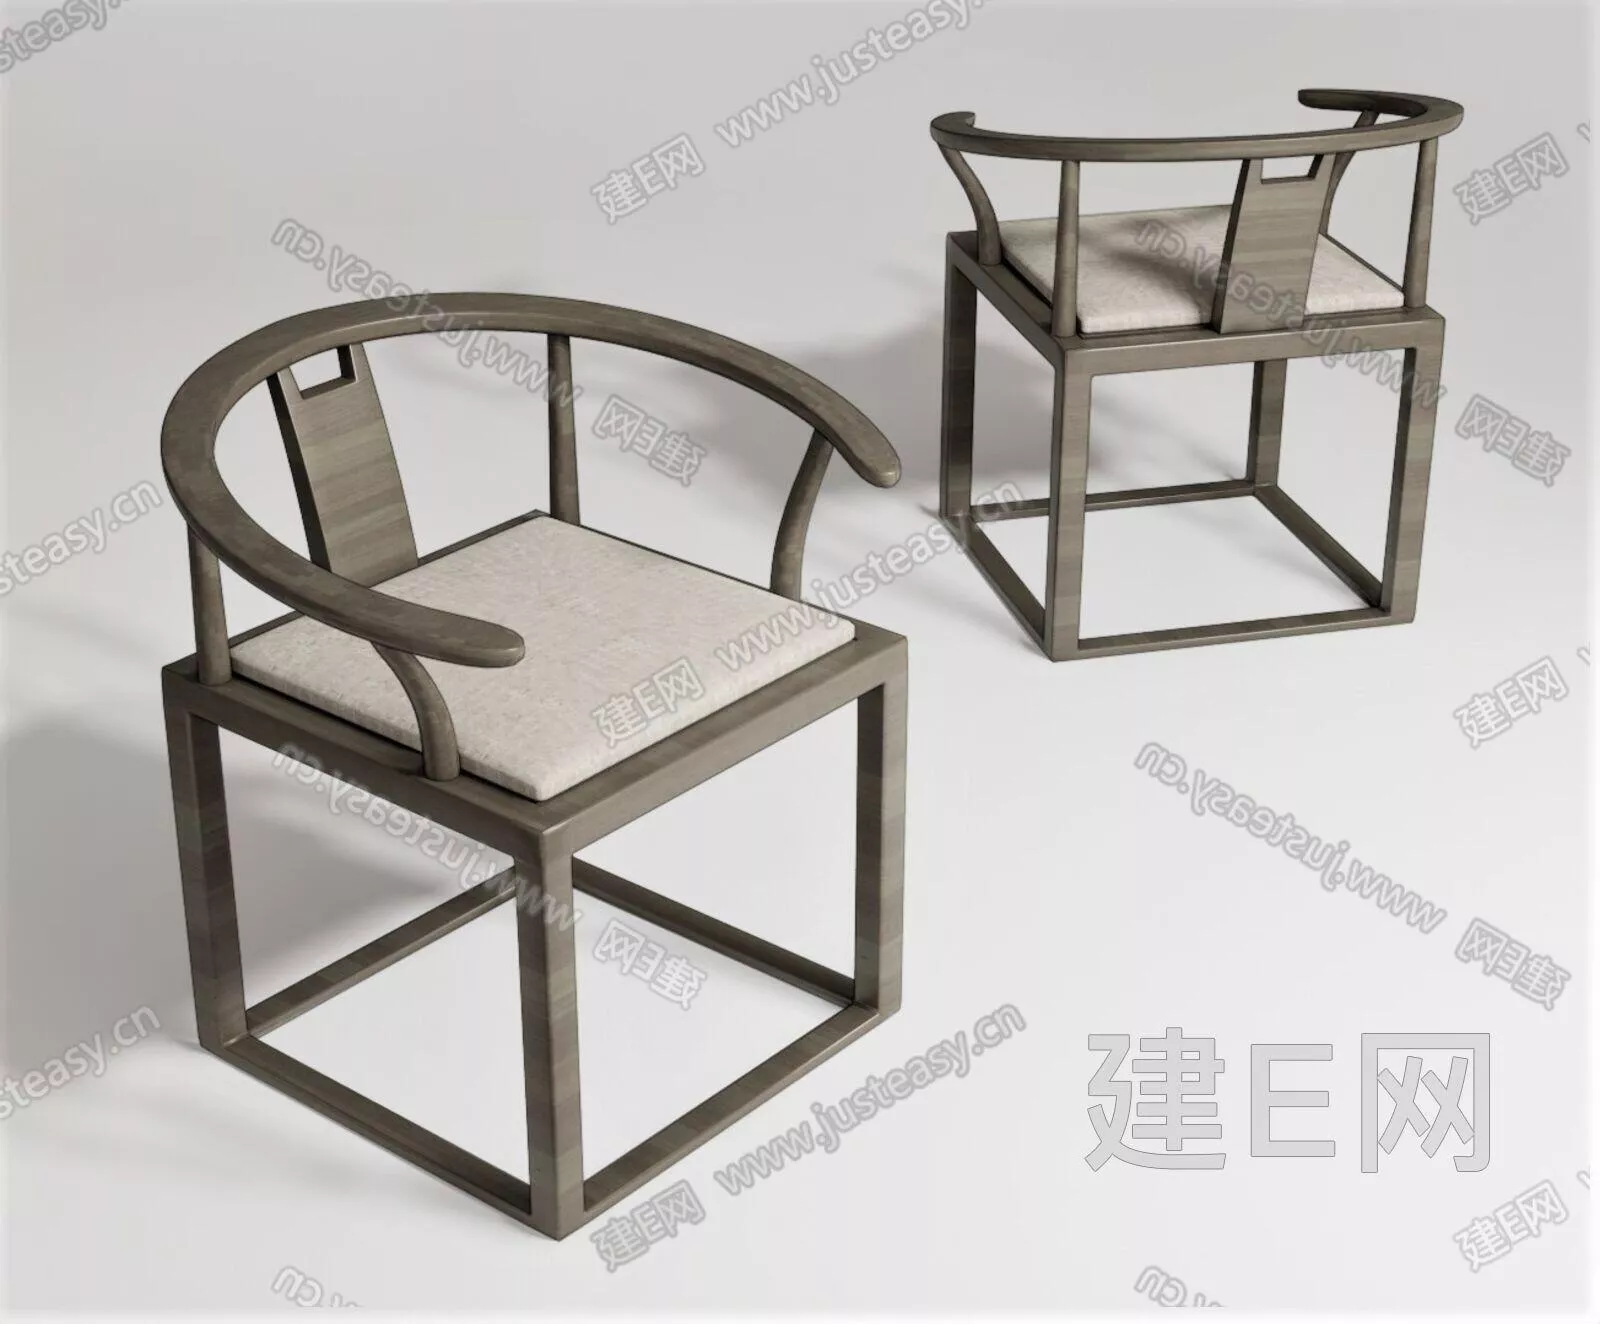 CHINESE LOUNGLE CHAIR - SKETCHUP 3D MODEL - ENSCAPE - 110576921